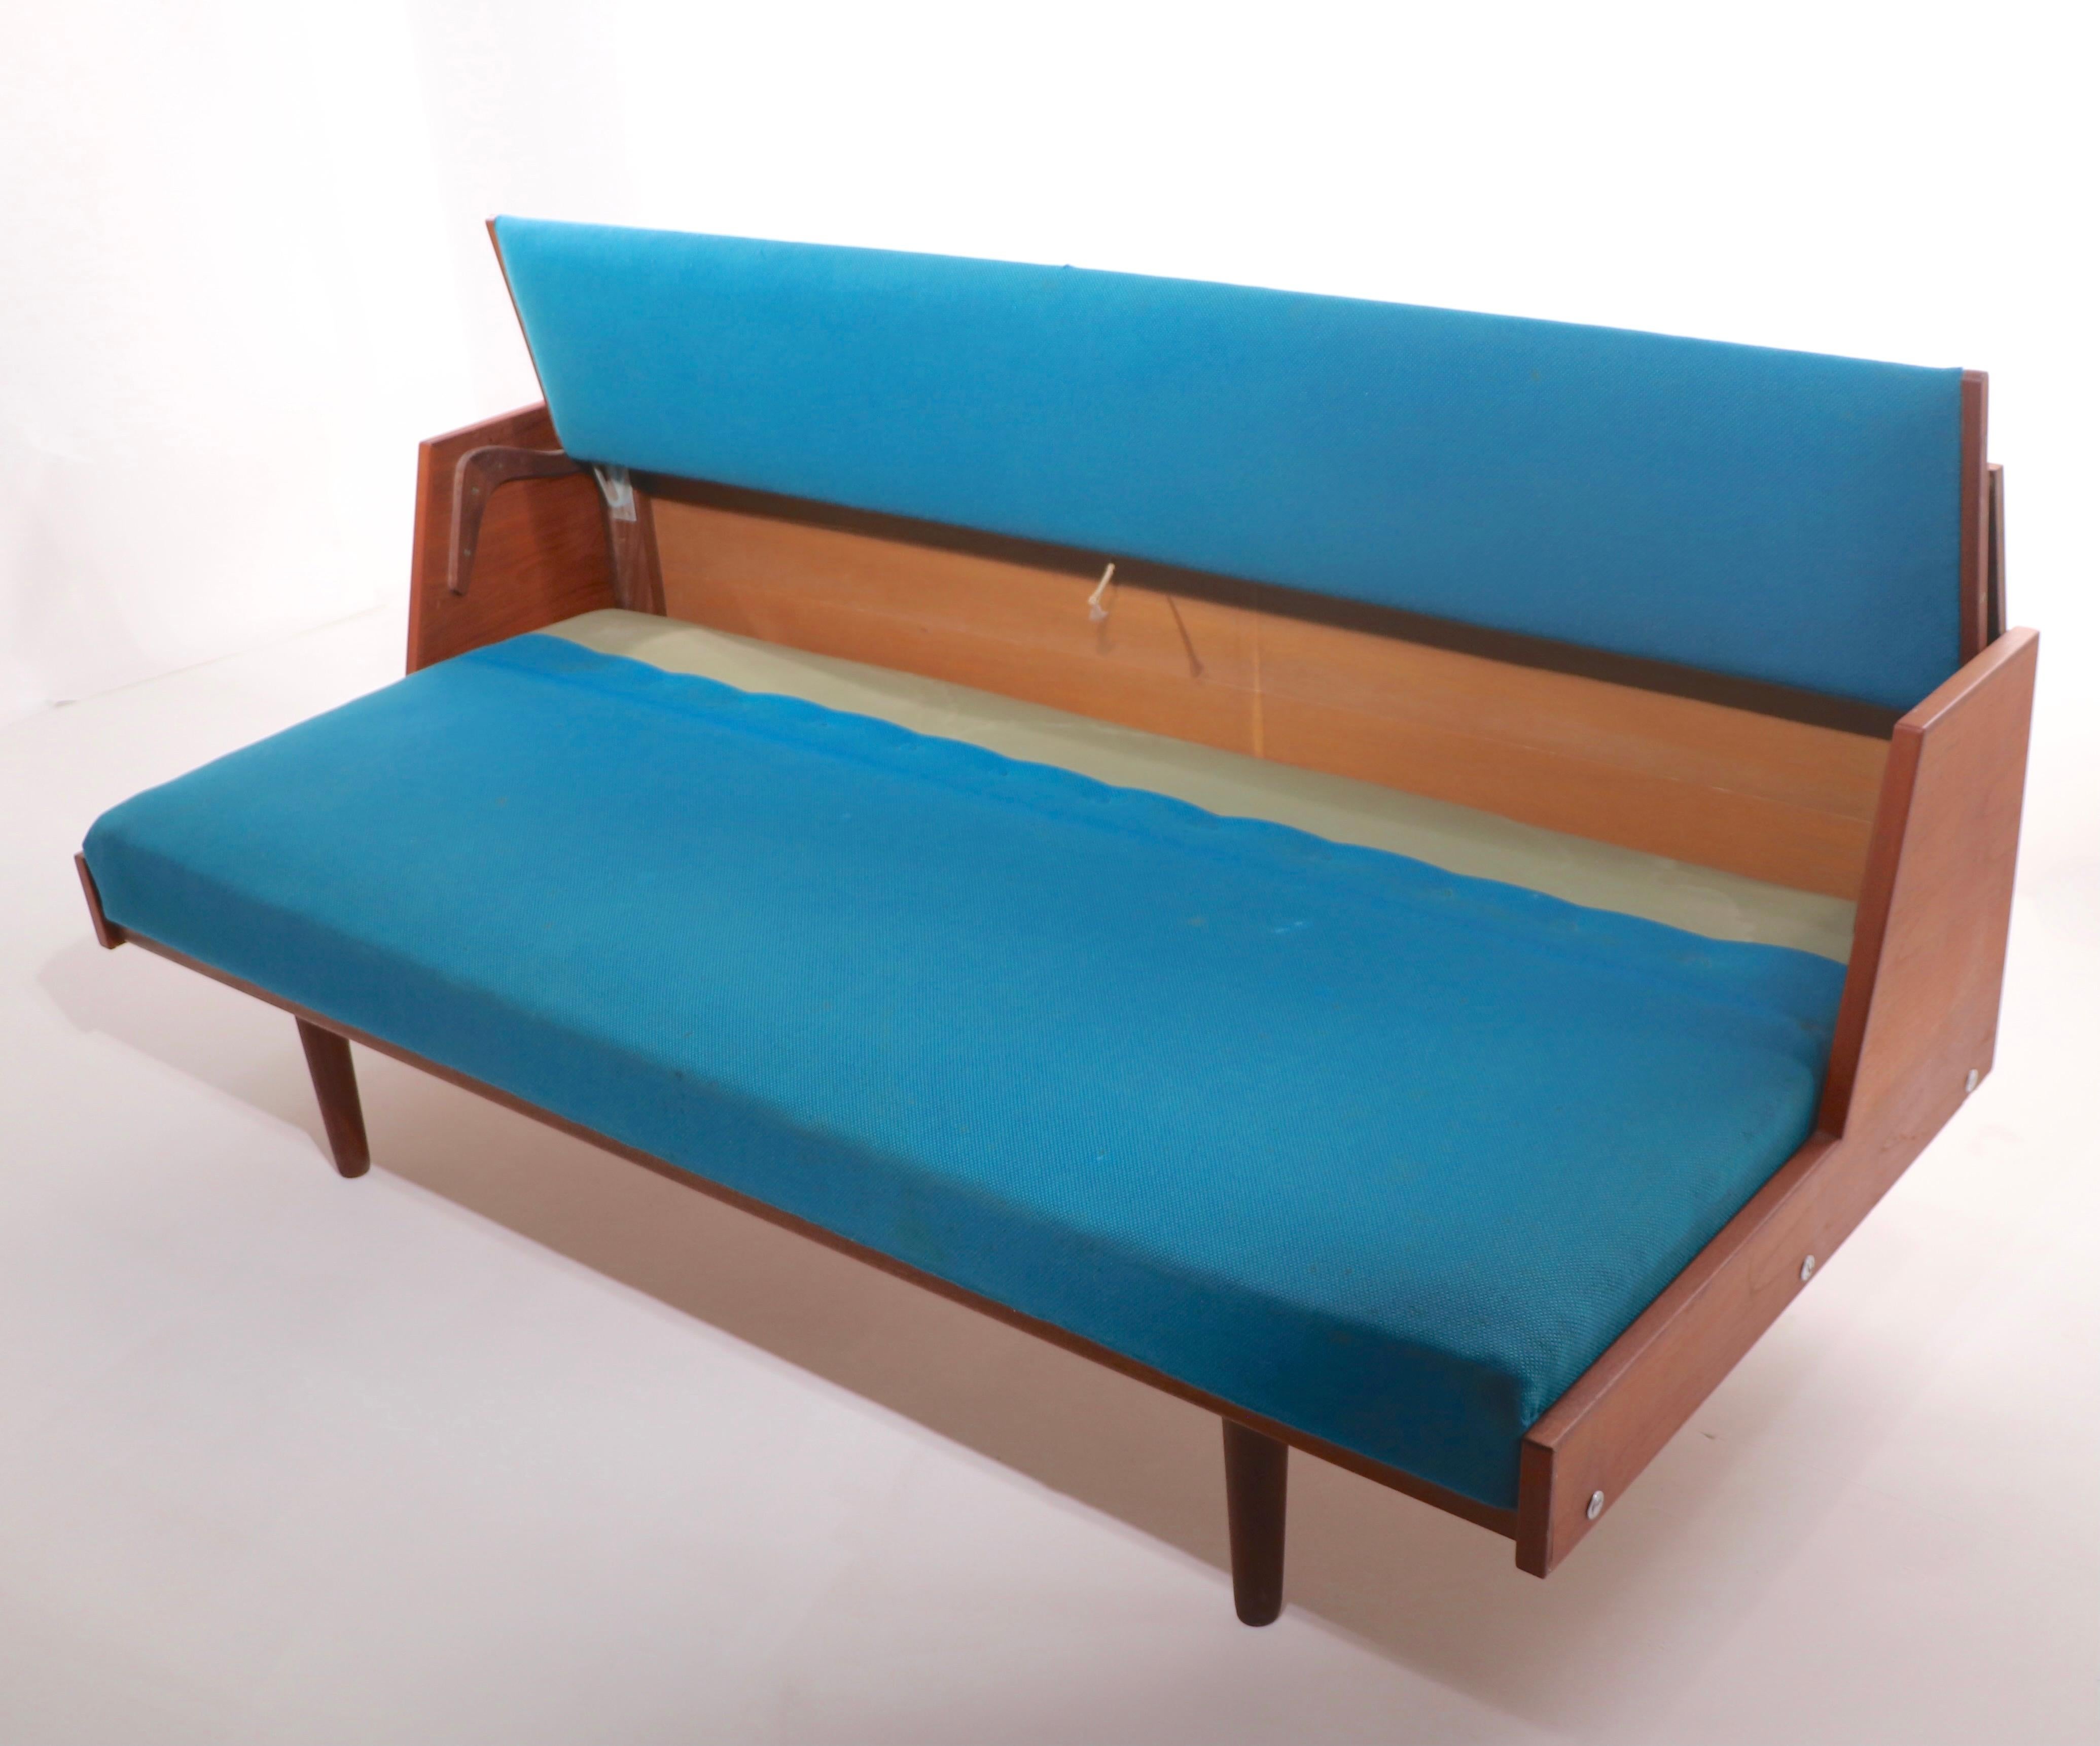 Danish Mid-Century Modern Daybed Sofa by Hans Wegner for Getma For Sale 1